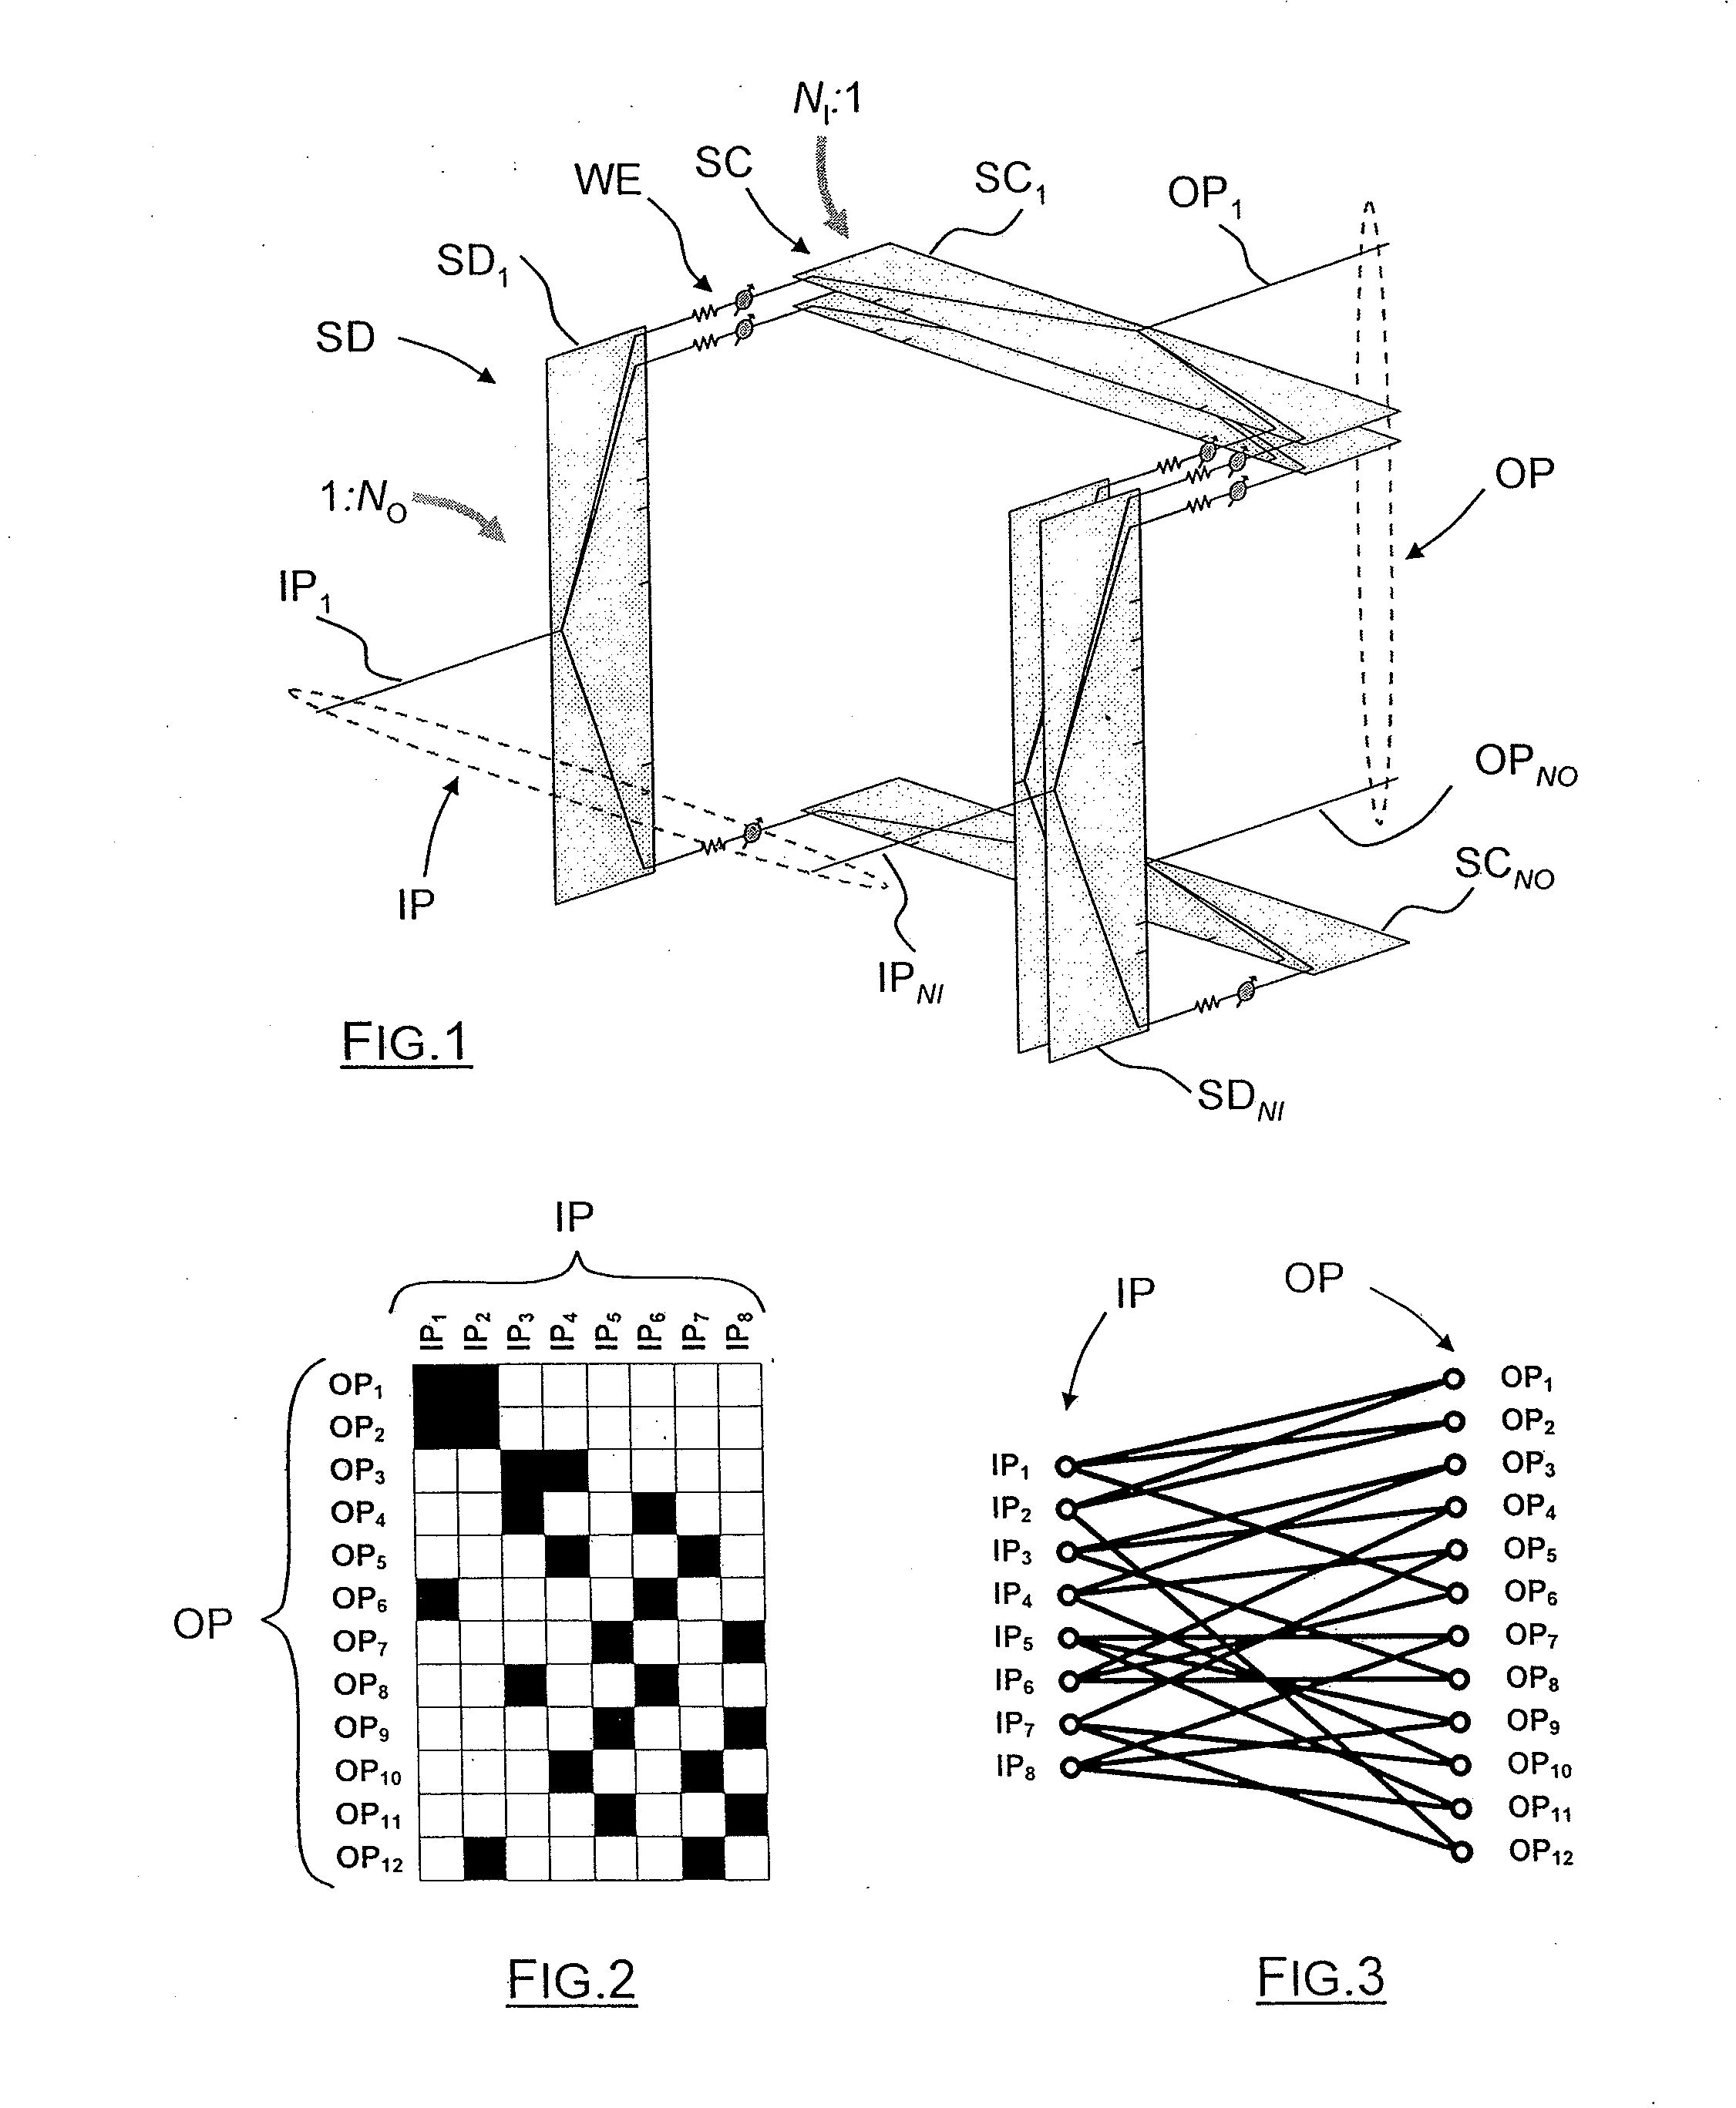 Reconfigurable beam-forming-network architecture